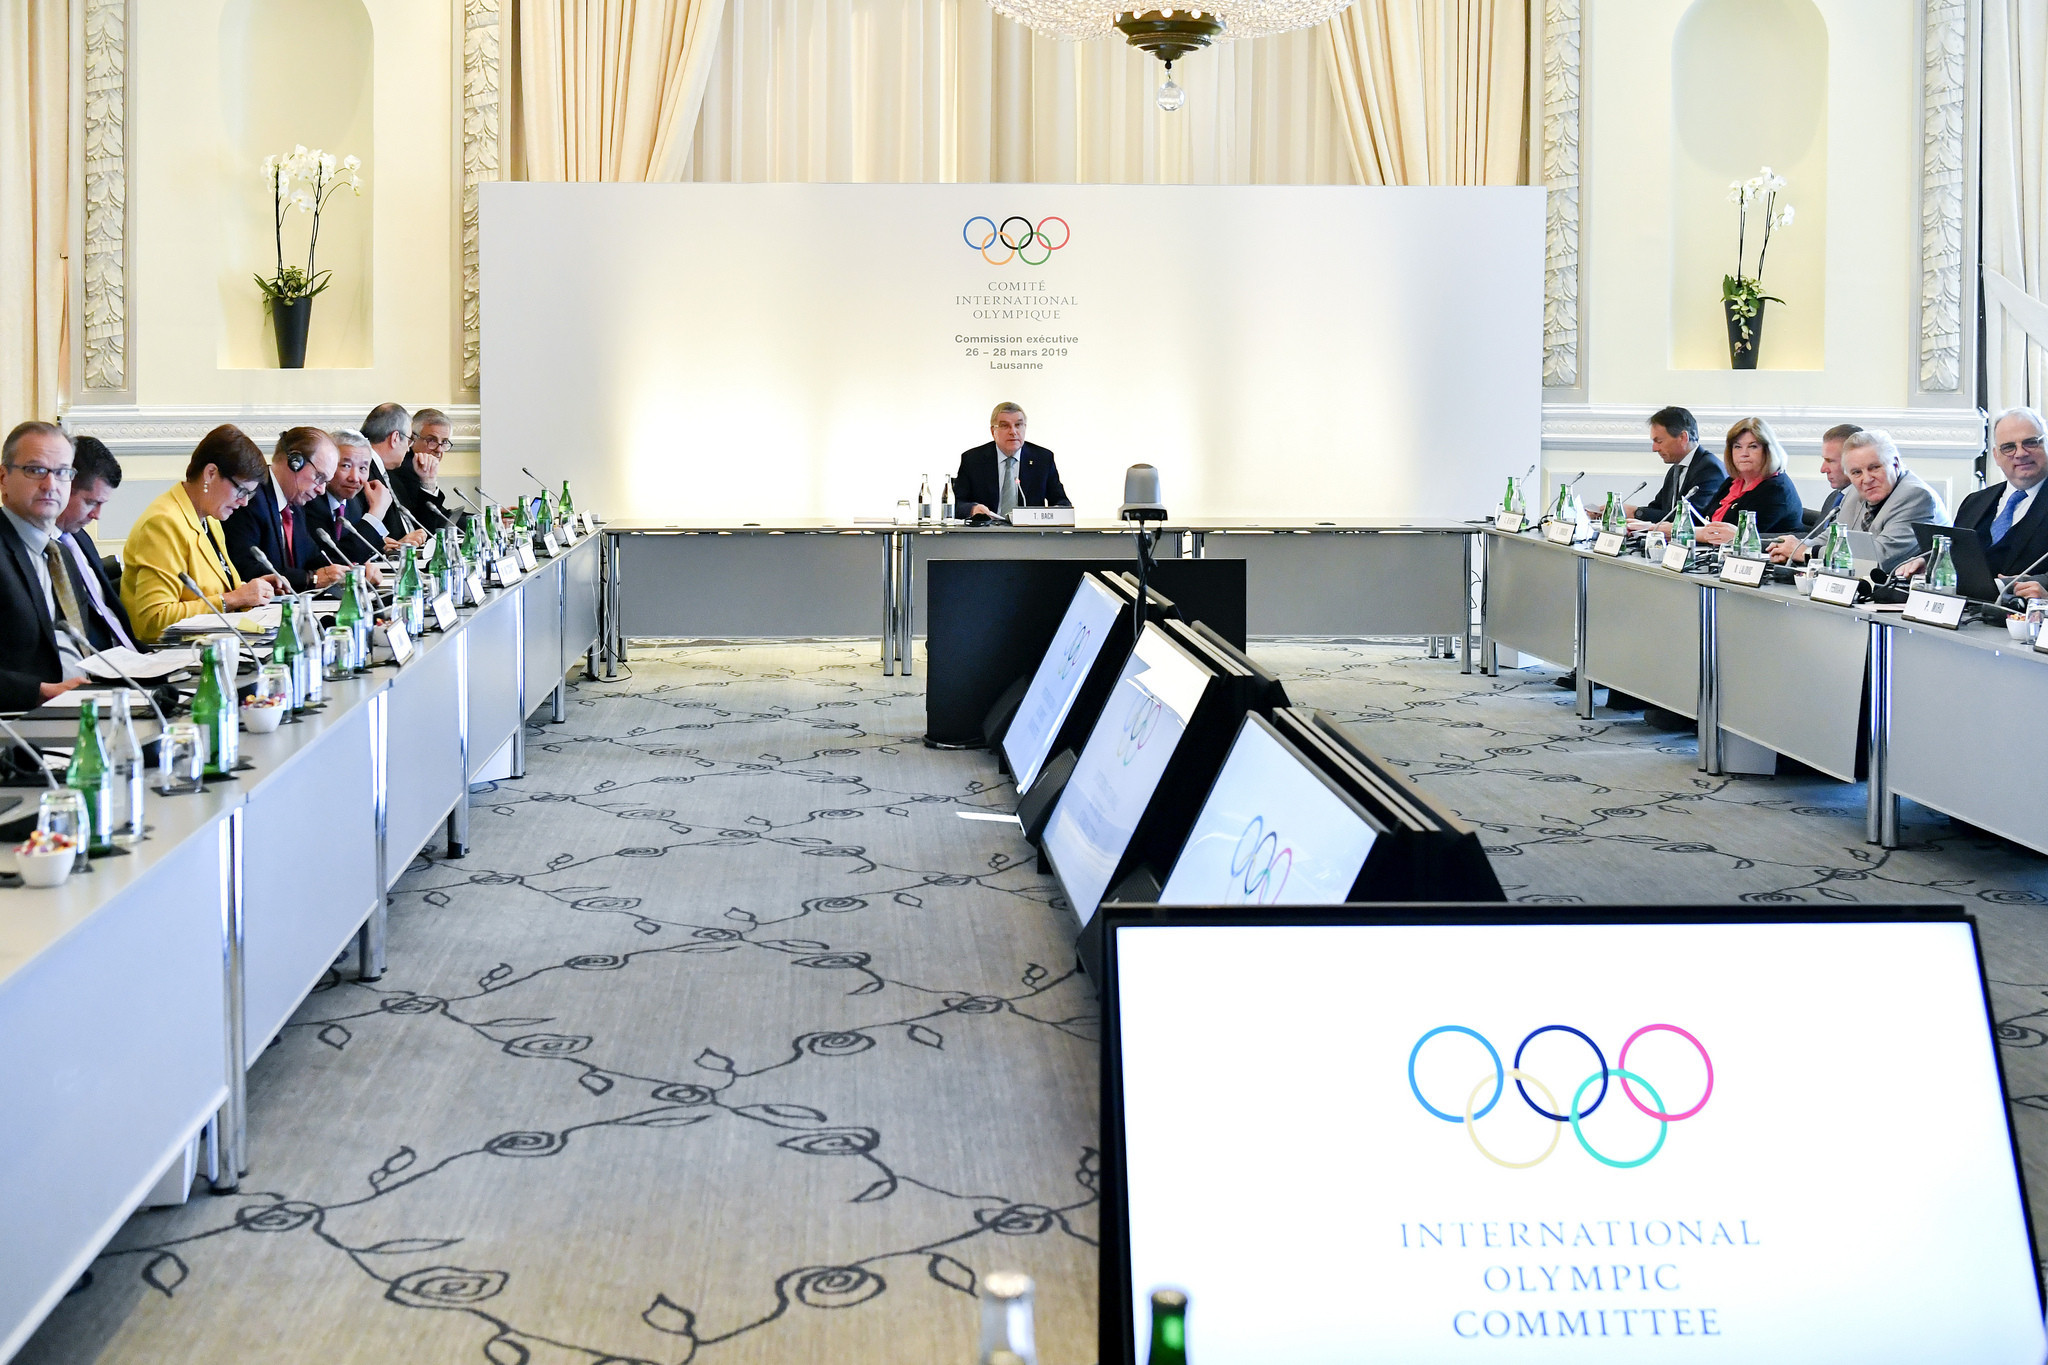 IOC push back start of Human Rights Advisory Committee work to devise strategy on topic